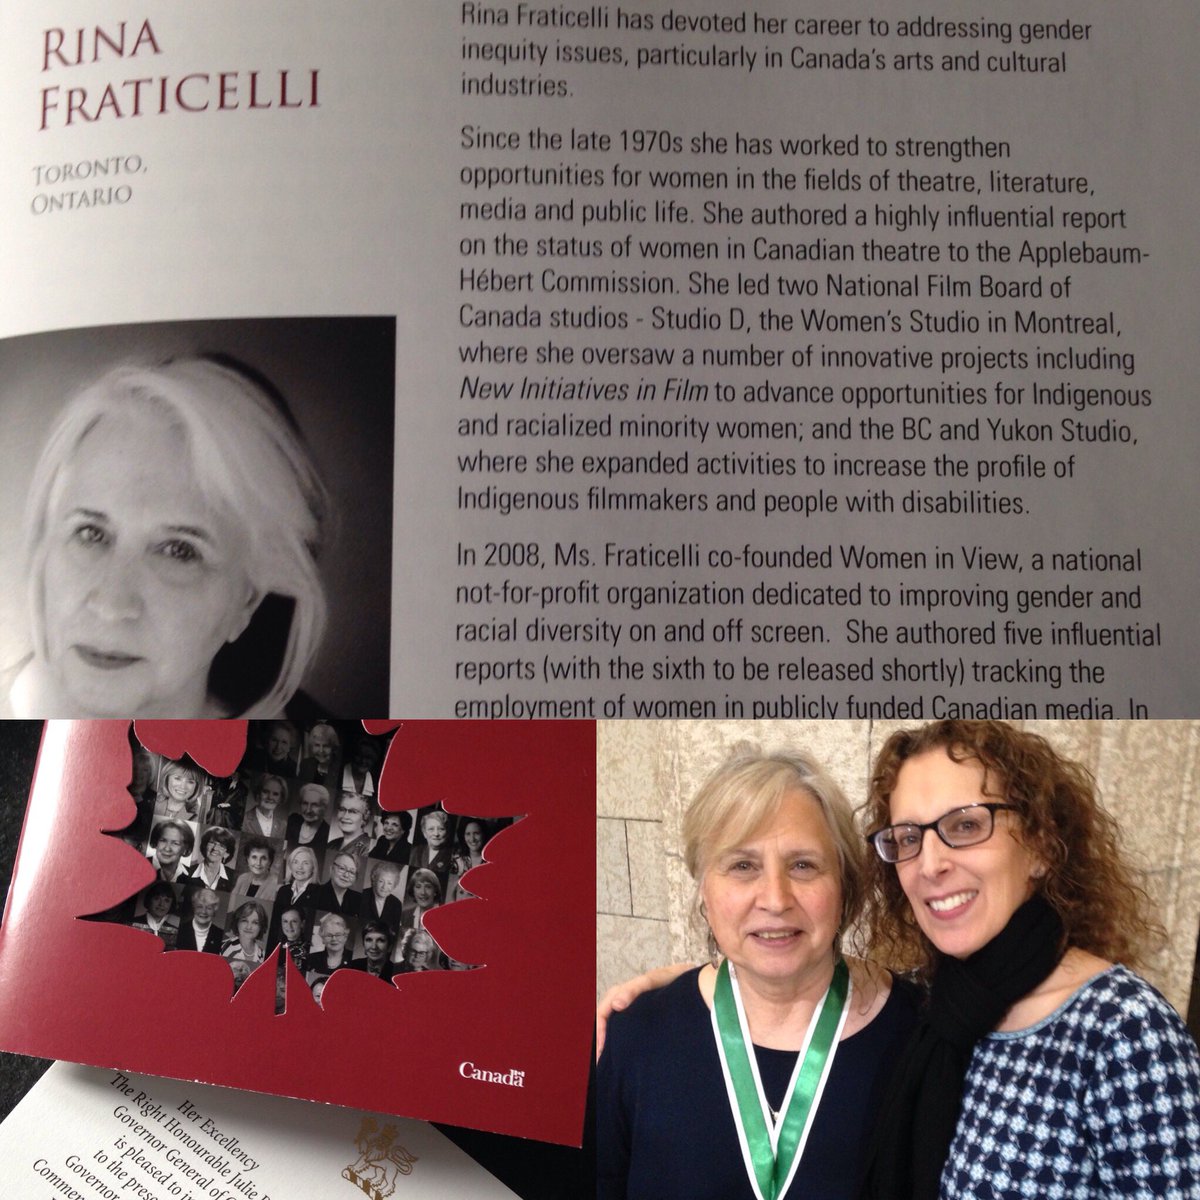 So proud of my godmother, Rina Fraticelli, on her #GGAward honouring all her gender equality work in the arts -  @thenfb @WomenInView, the BC and Yukon Studios - to name a few - thank you for including me in the celebrations - ow.ly/eVZu30mXKIC